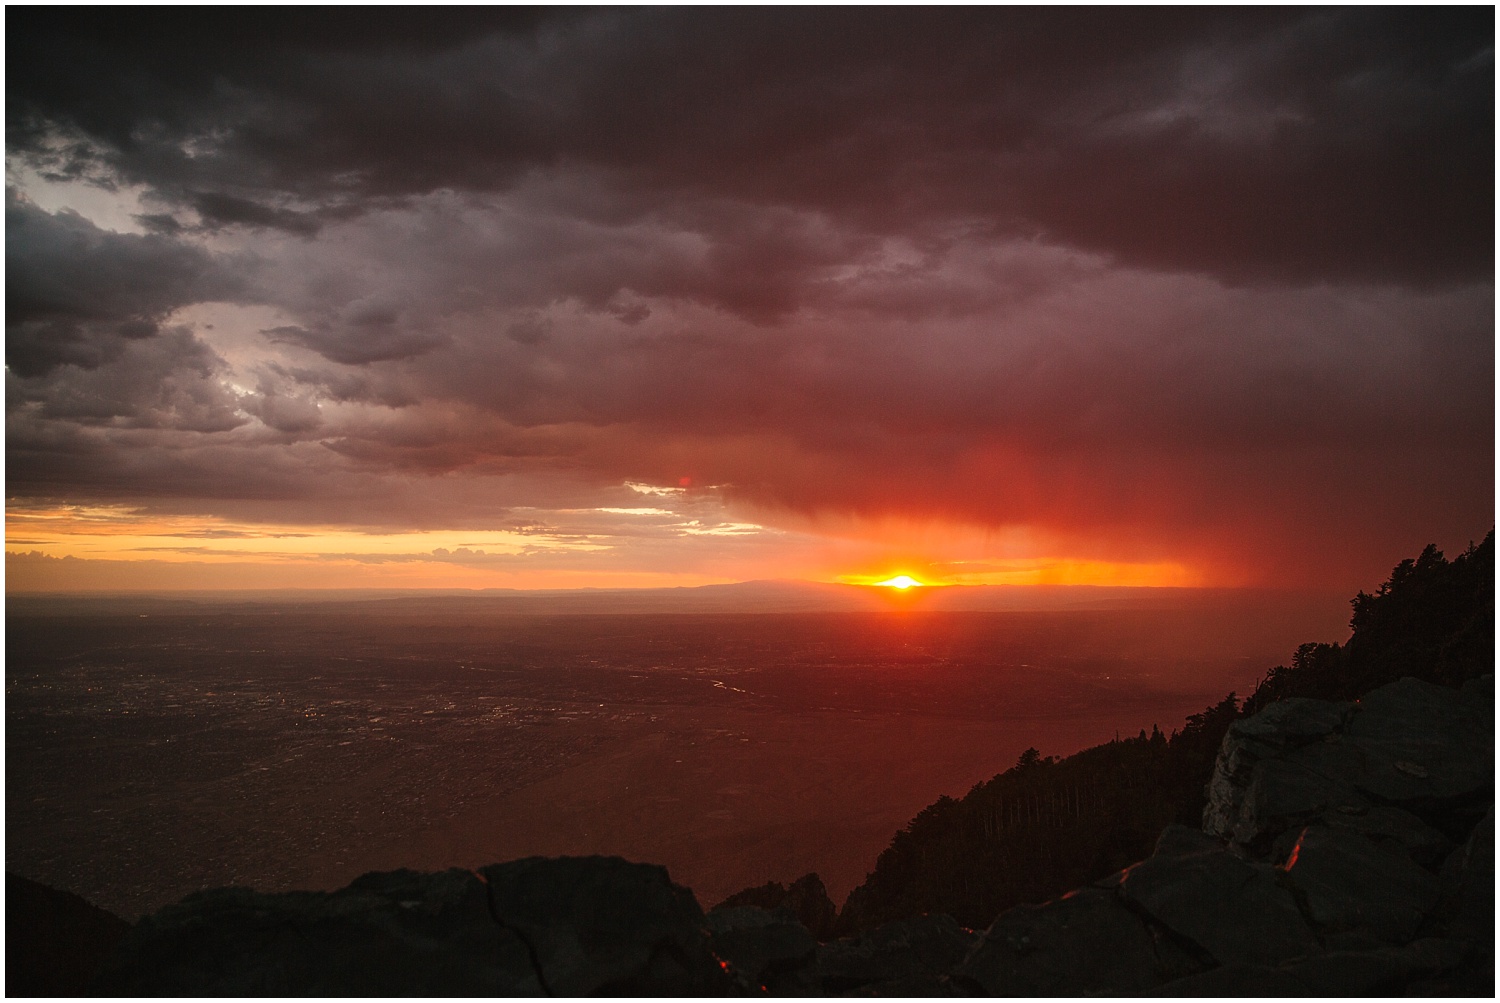 sun setting over Albuquerque from Sandia Crest after a heavy thunderstorm